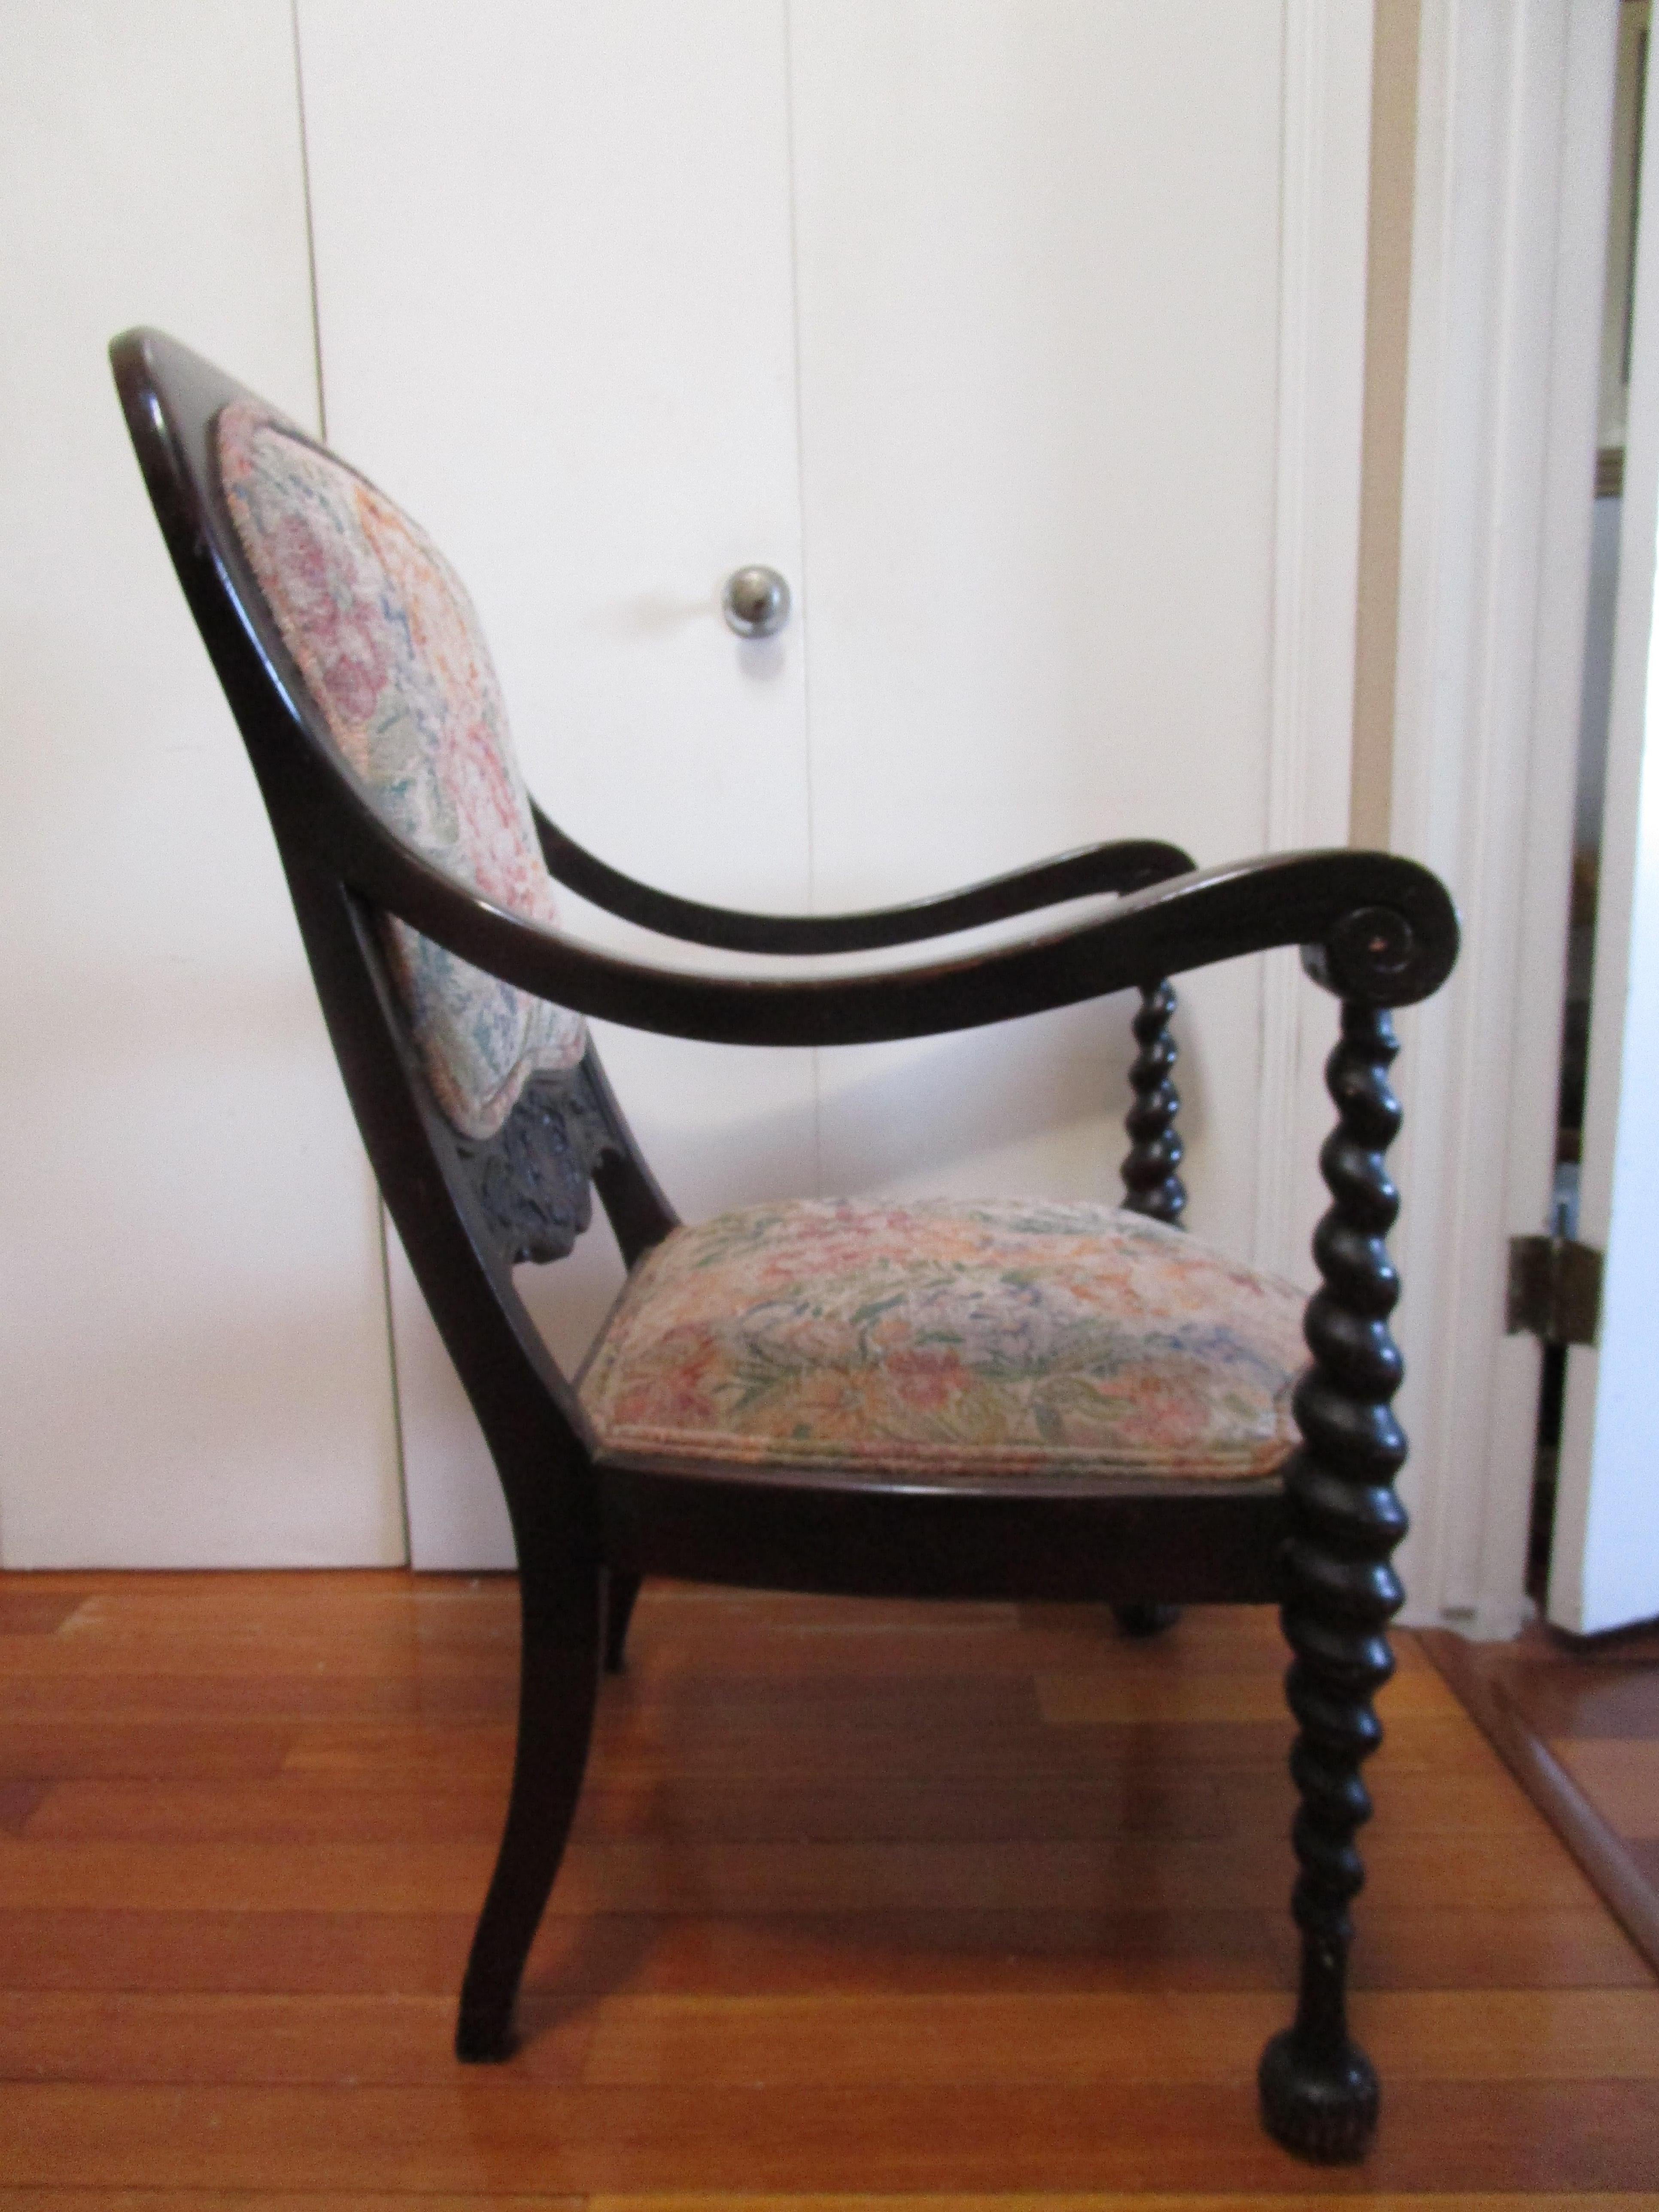 Beautiful turned front legs, vintage tapestry upholstery, and ebonized carved wood combine to make this mannerist revival chair worth a second look. The piece interesting chair - and seems to combine elements of different styles. It is definitely